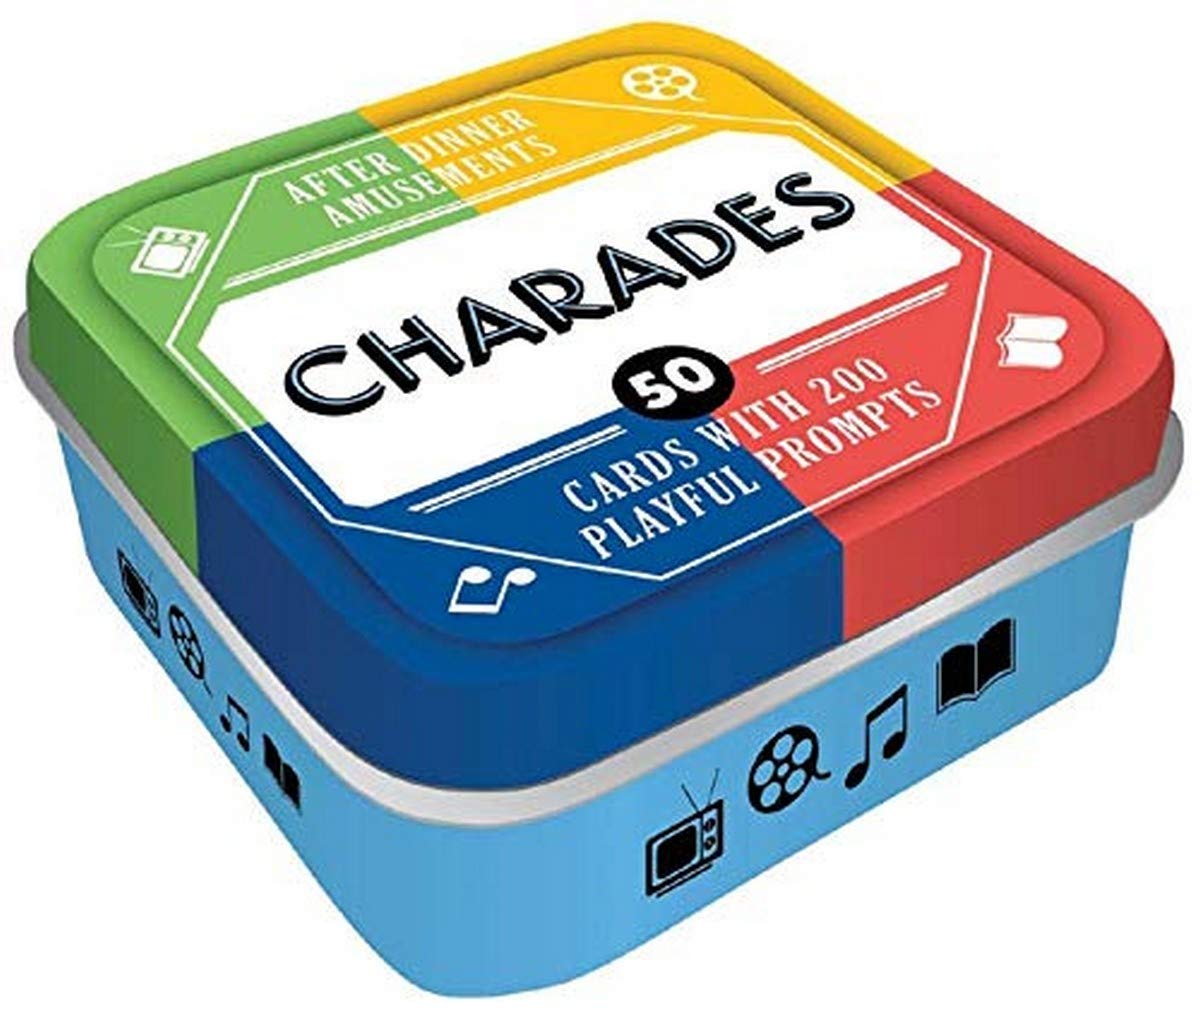 Book Cover After Dinner Amusements: Charades: 50 Cards with 200 Playful Prompts (Charades Game for Adults and Family, Portable Camping and Holiday Games) Charades Charades Books